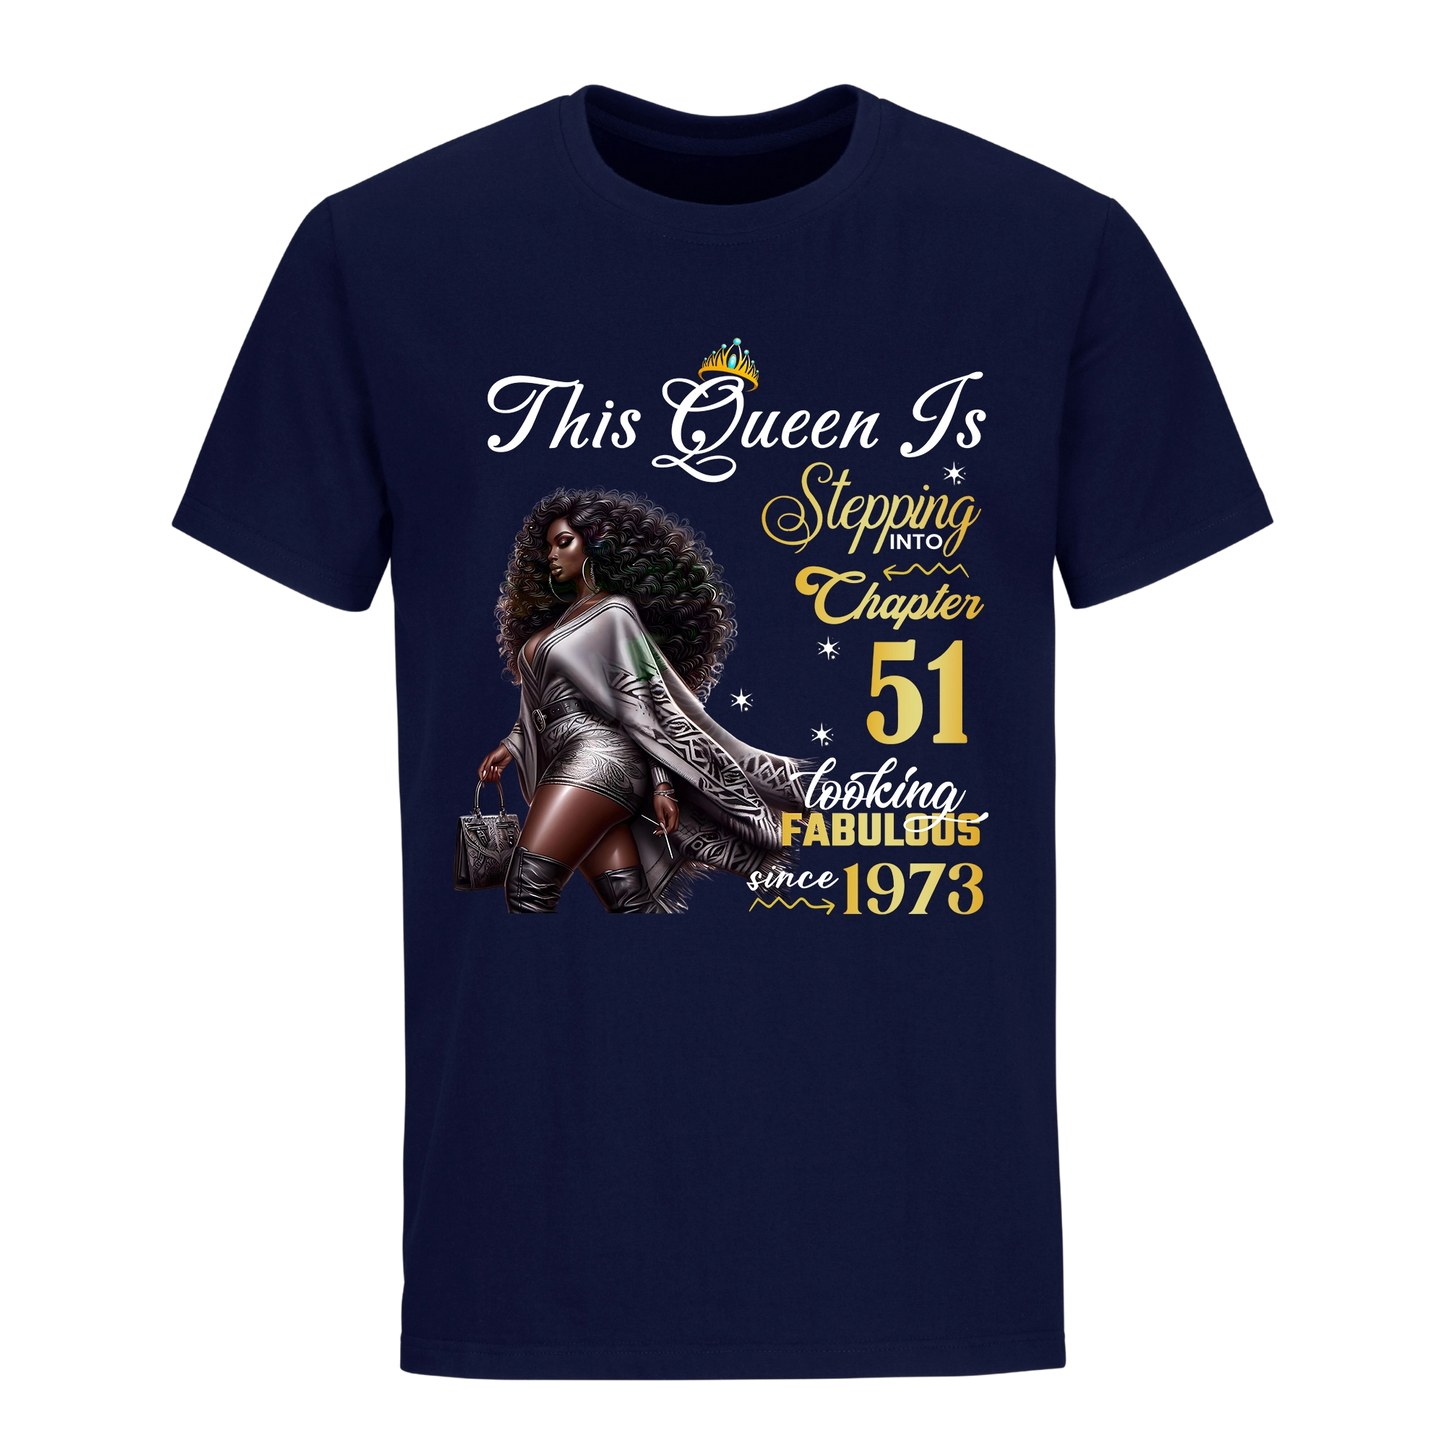 THIS QUEEN IS FABULOUS 51 UNISEX SHIRT